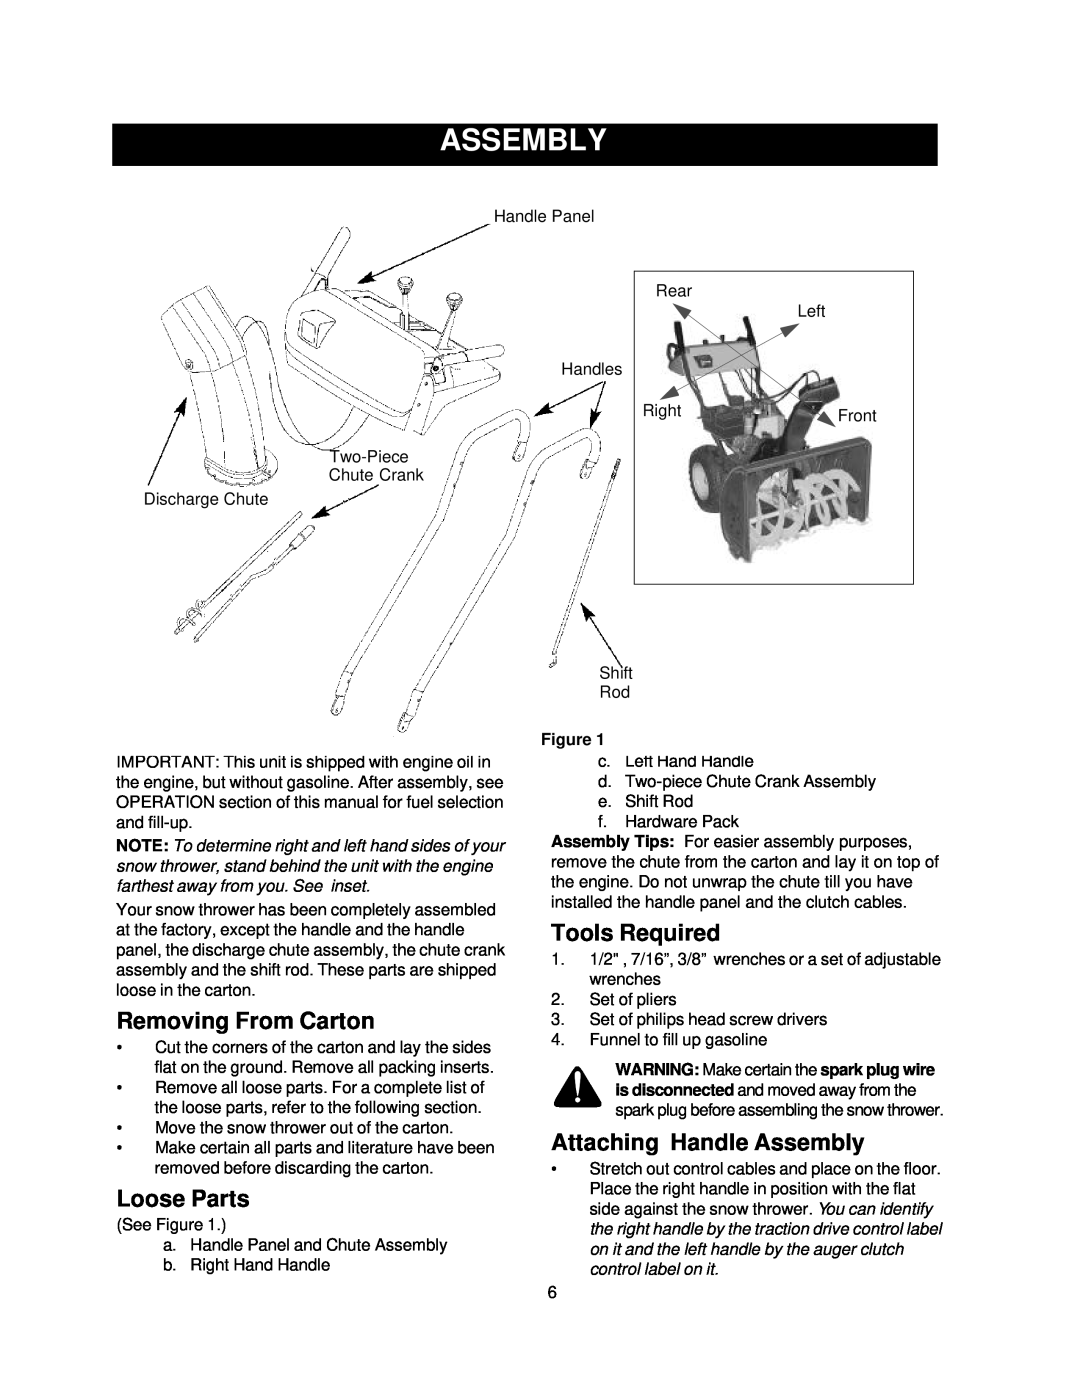 Sears 247.88852 owner manual Removing From Carton, Loose Parts, Tools Required, Attaching Handle Assembly 